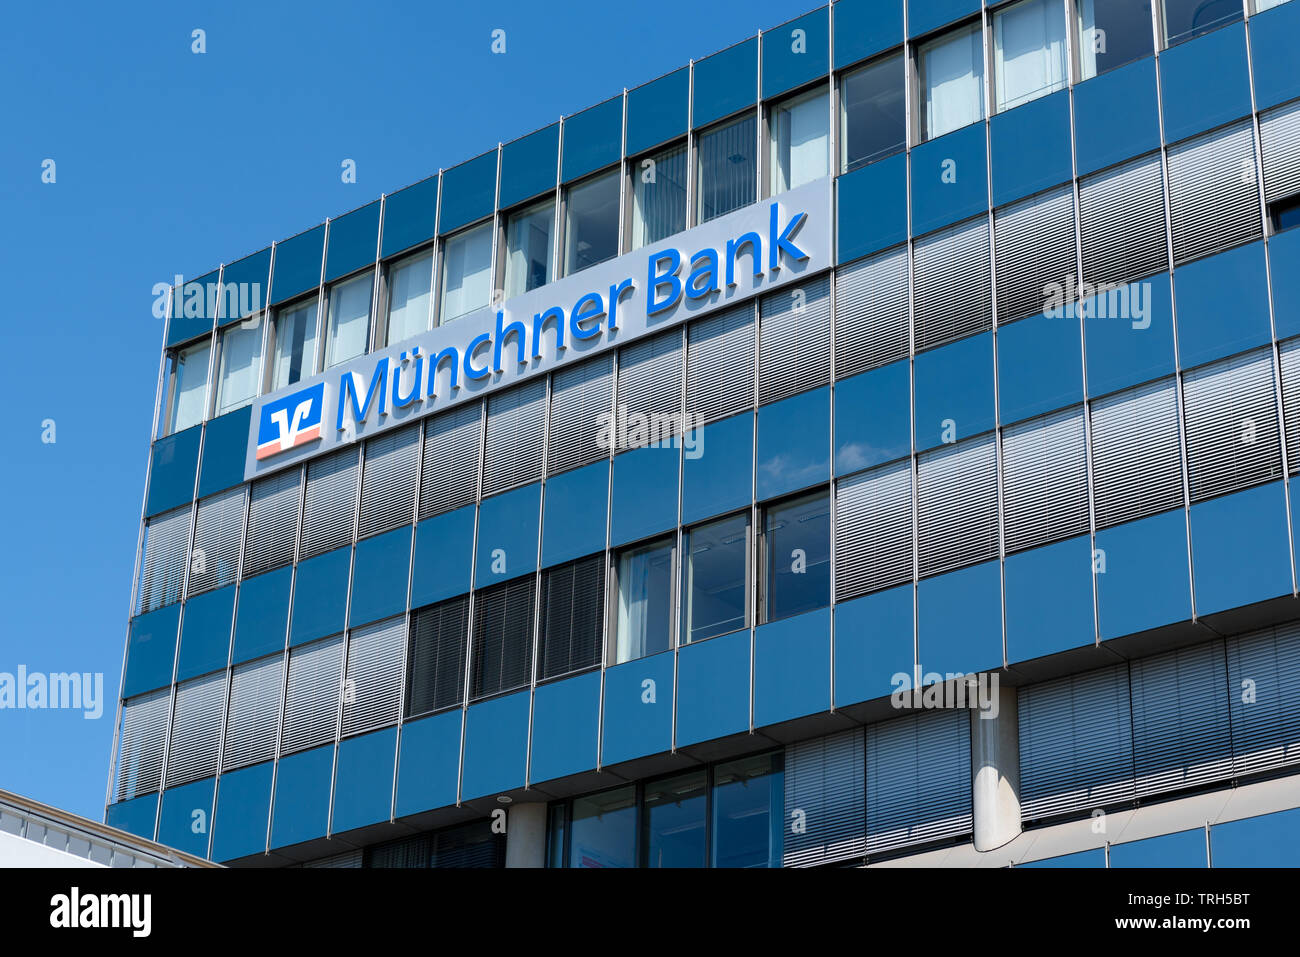 Modern bank building in Munich, Germany with the name Münchner Bank written on the side Stock Photo